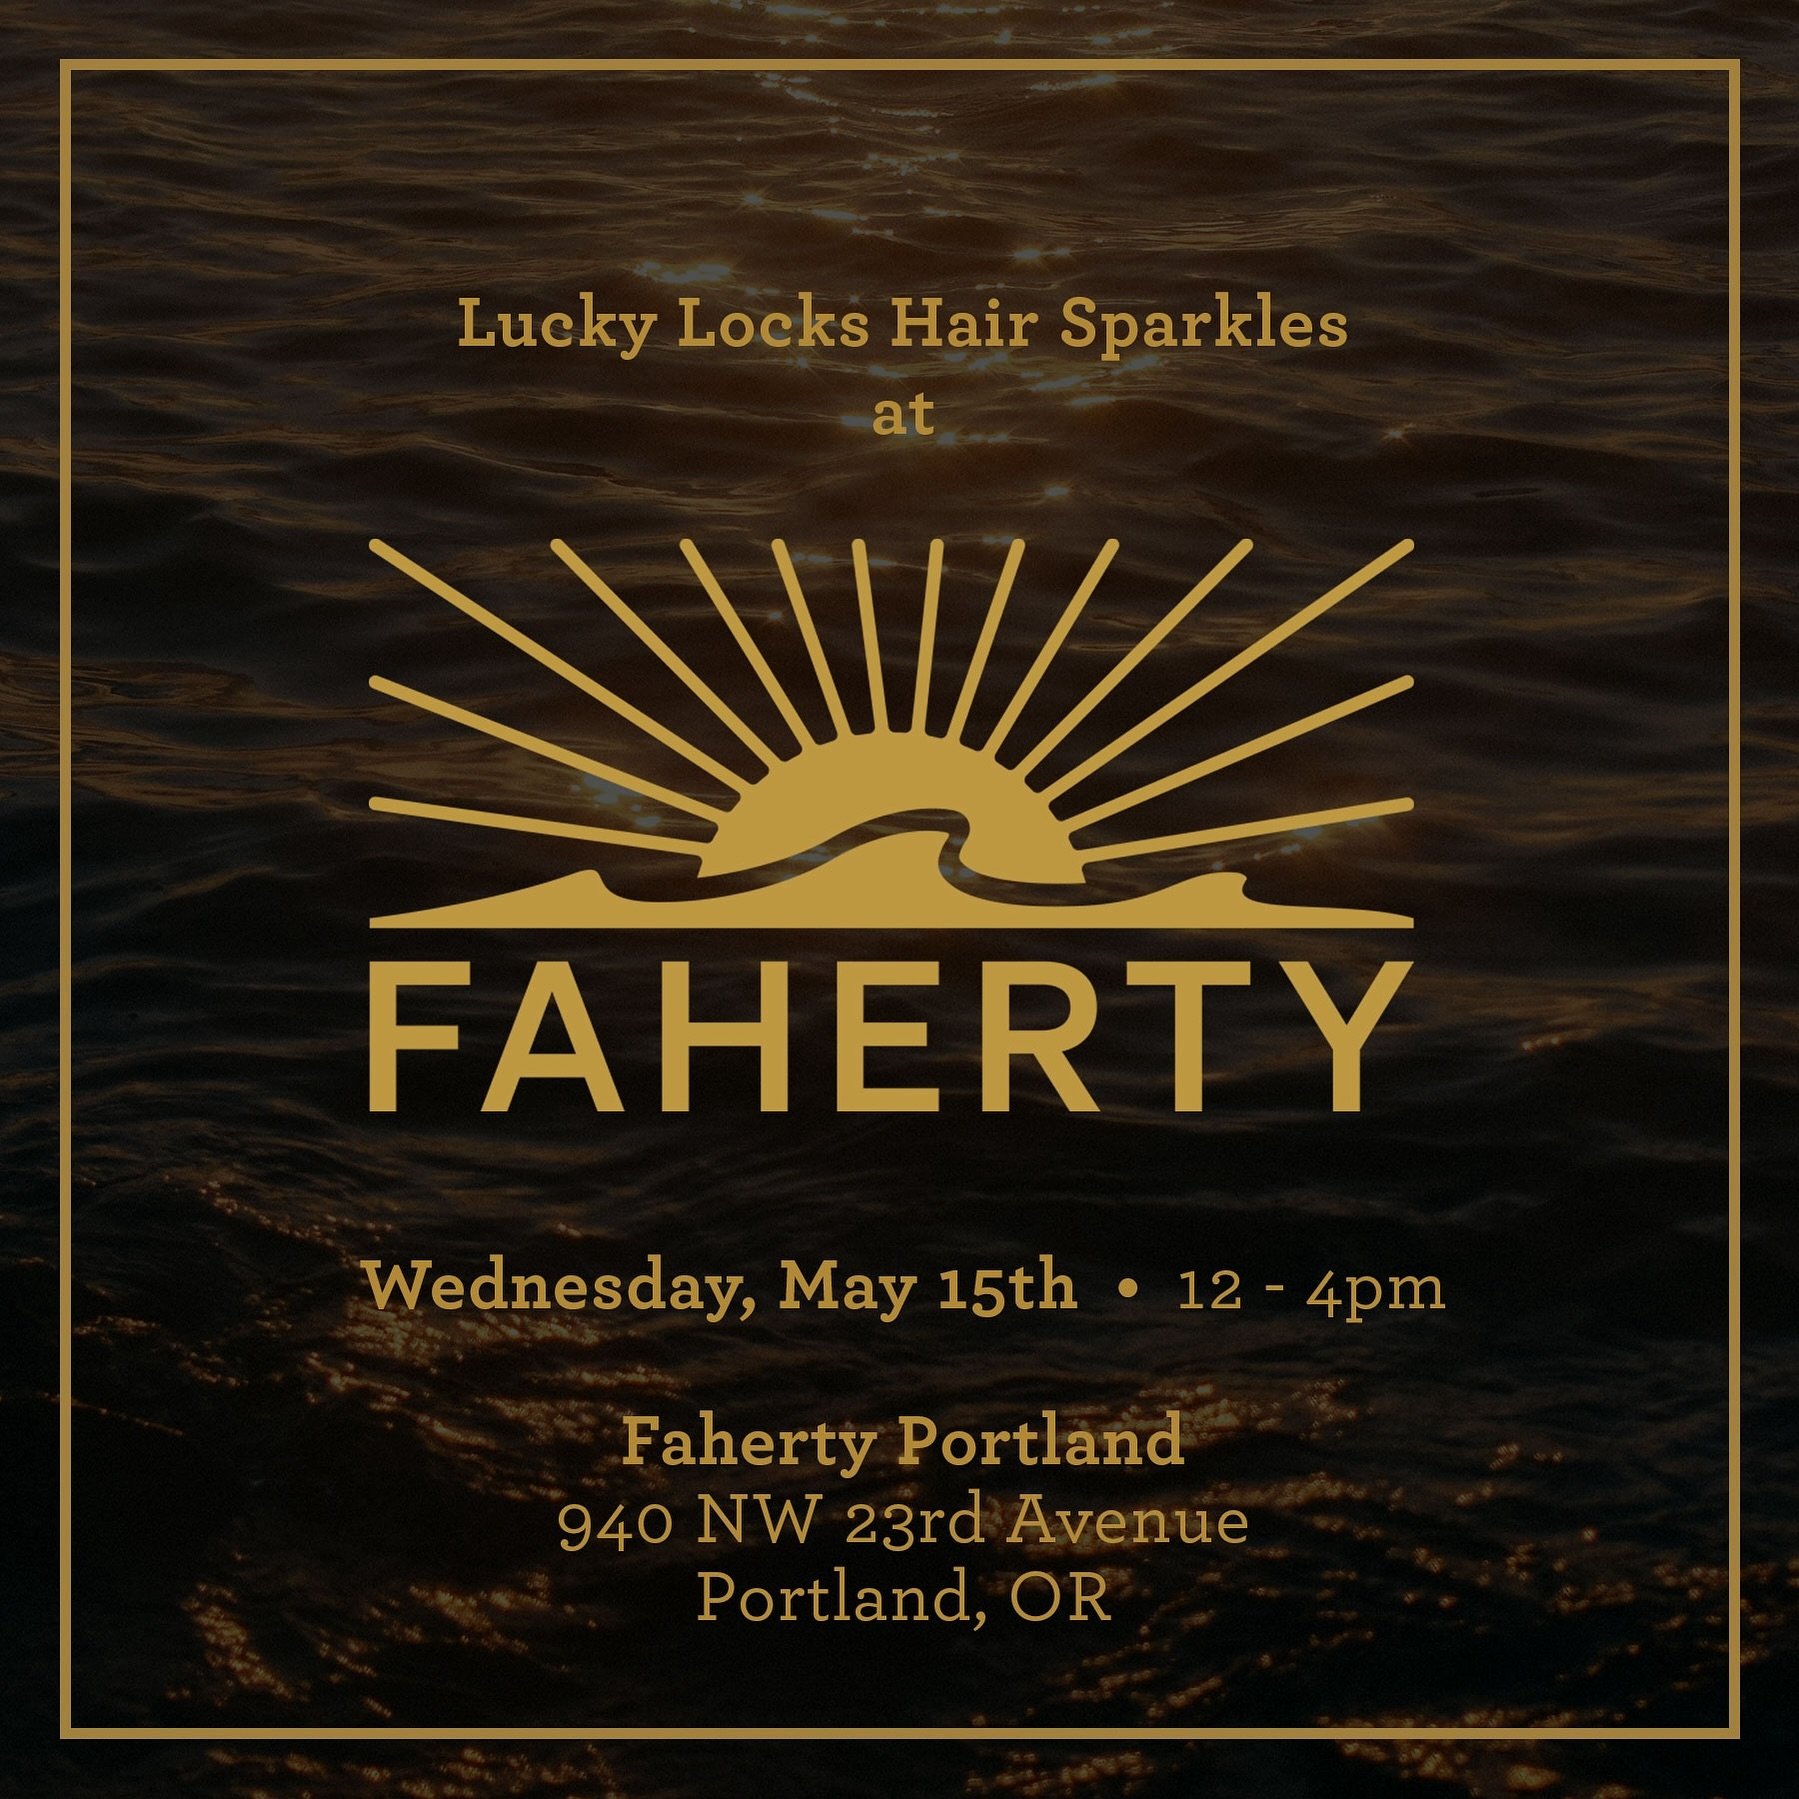 Lucky Locks has been working with Faherty in Los Angeles, New York &amp; Nashville for the last few years and we are now excited to bring some sparkle to their corner of the PNW! 

Only a few slots remain for our first Portland @fahertybrand pop-up c